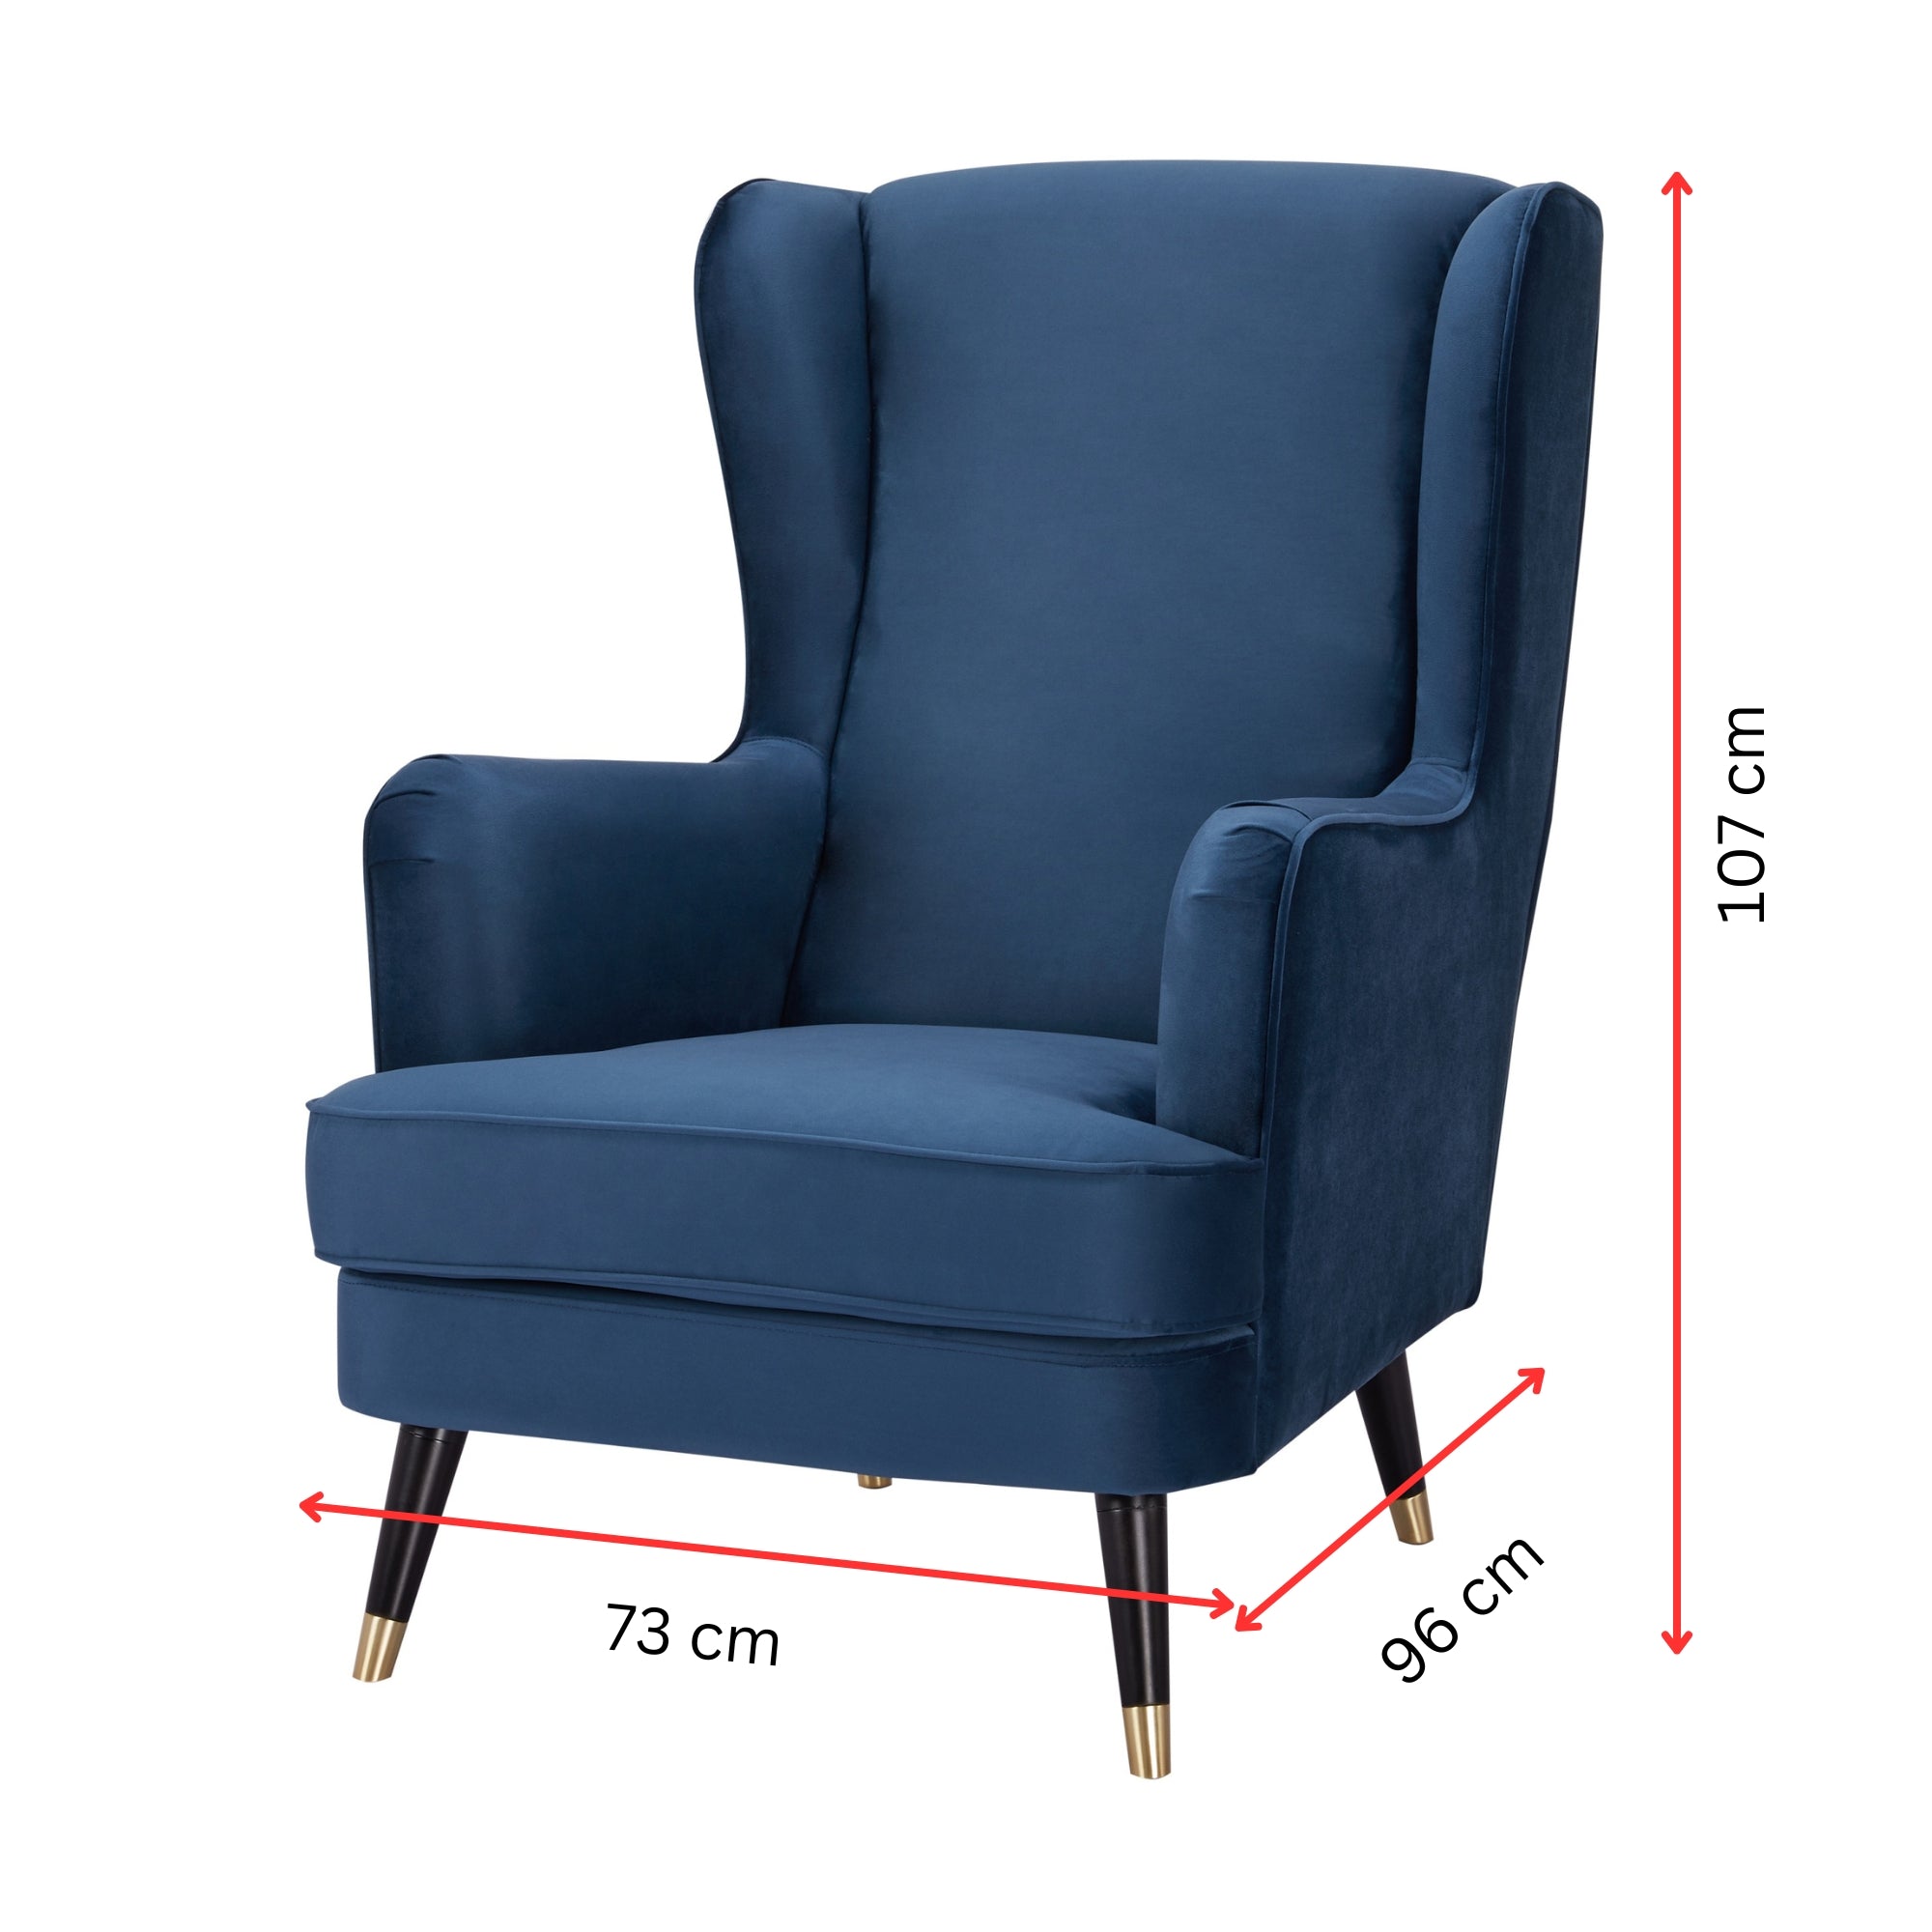 Vivian Accent Sofa Arm Chair Fabric Uplholstered Lounge Couch - Navy